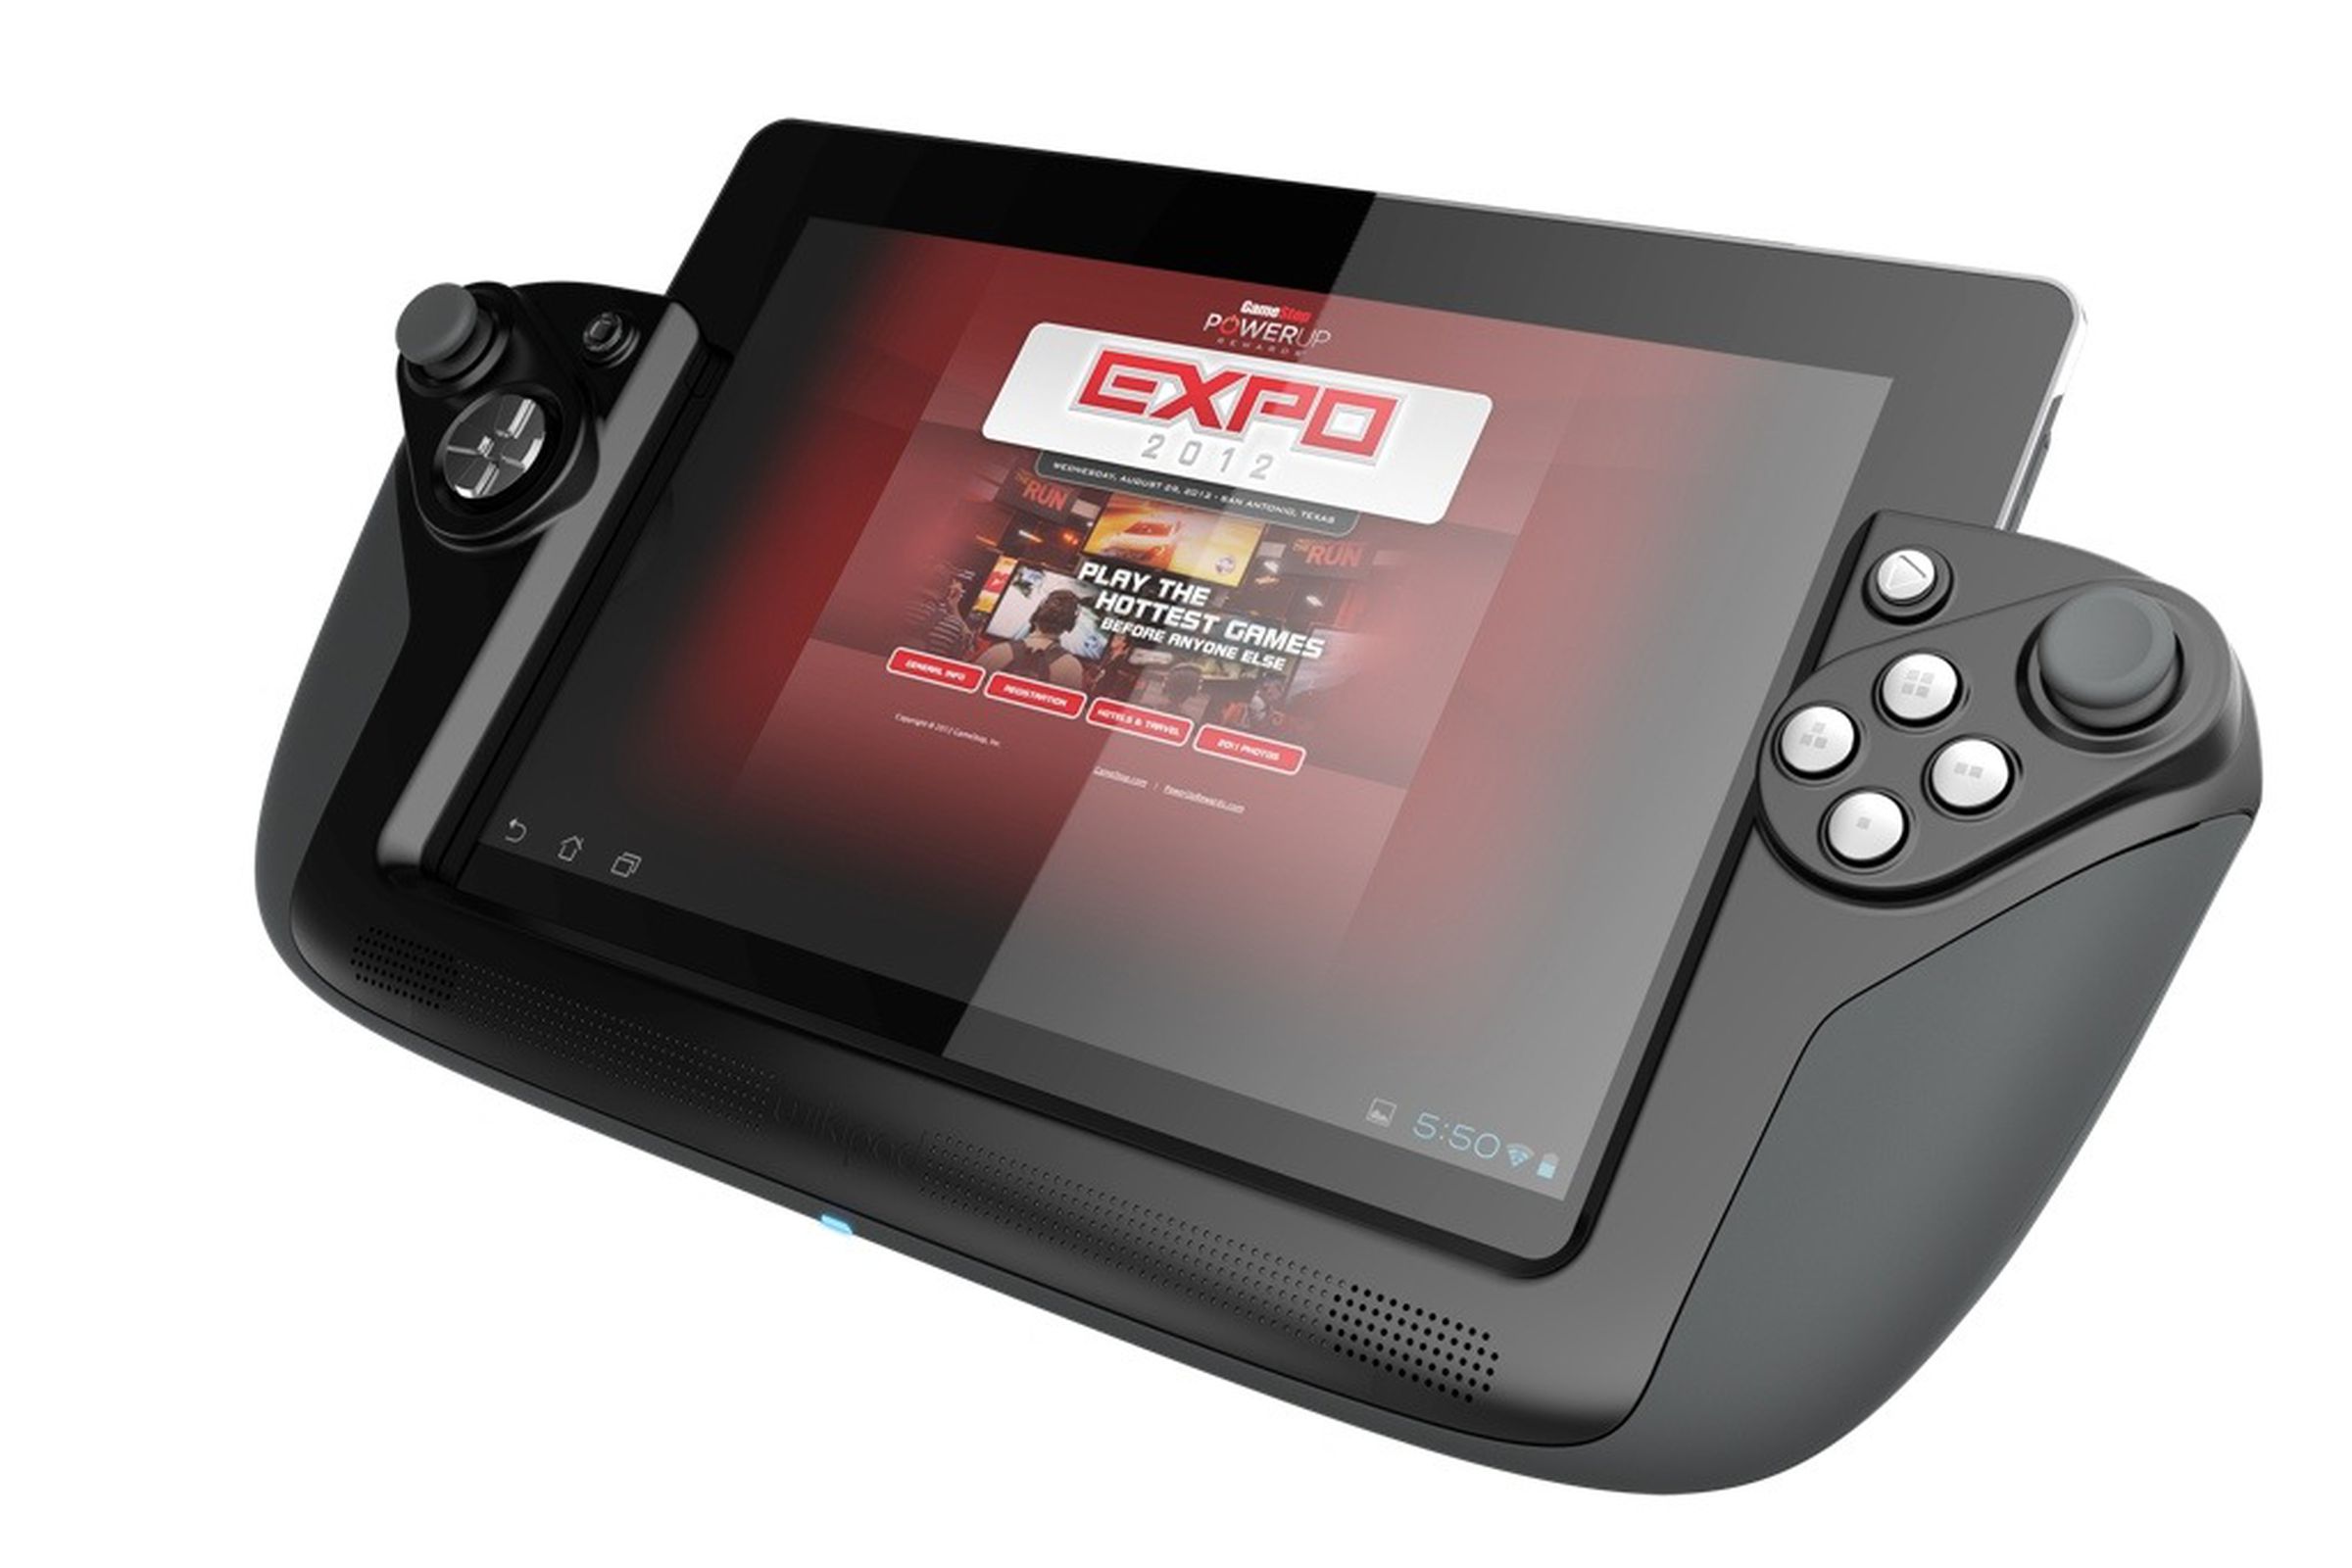 Gallery Photo: Wikipad gaming tablet press pictures